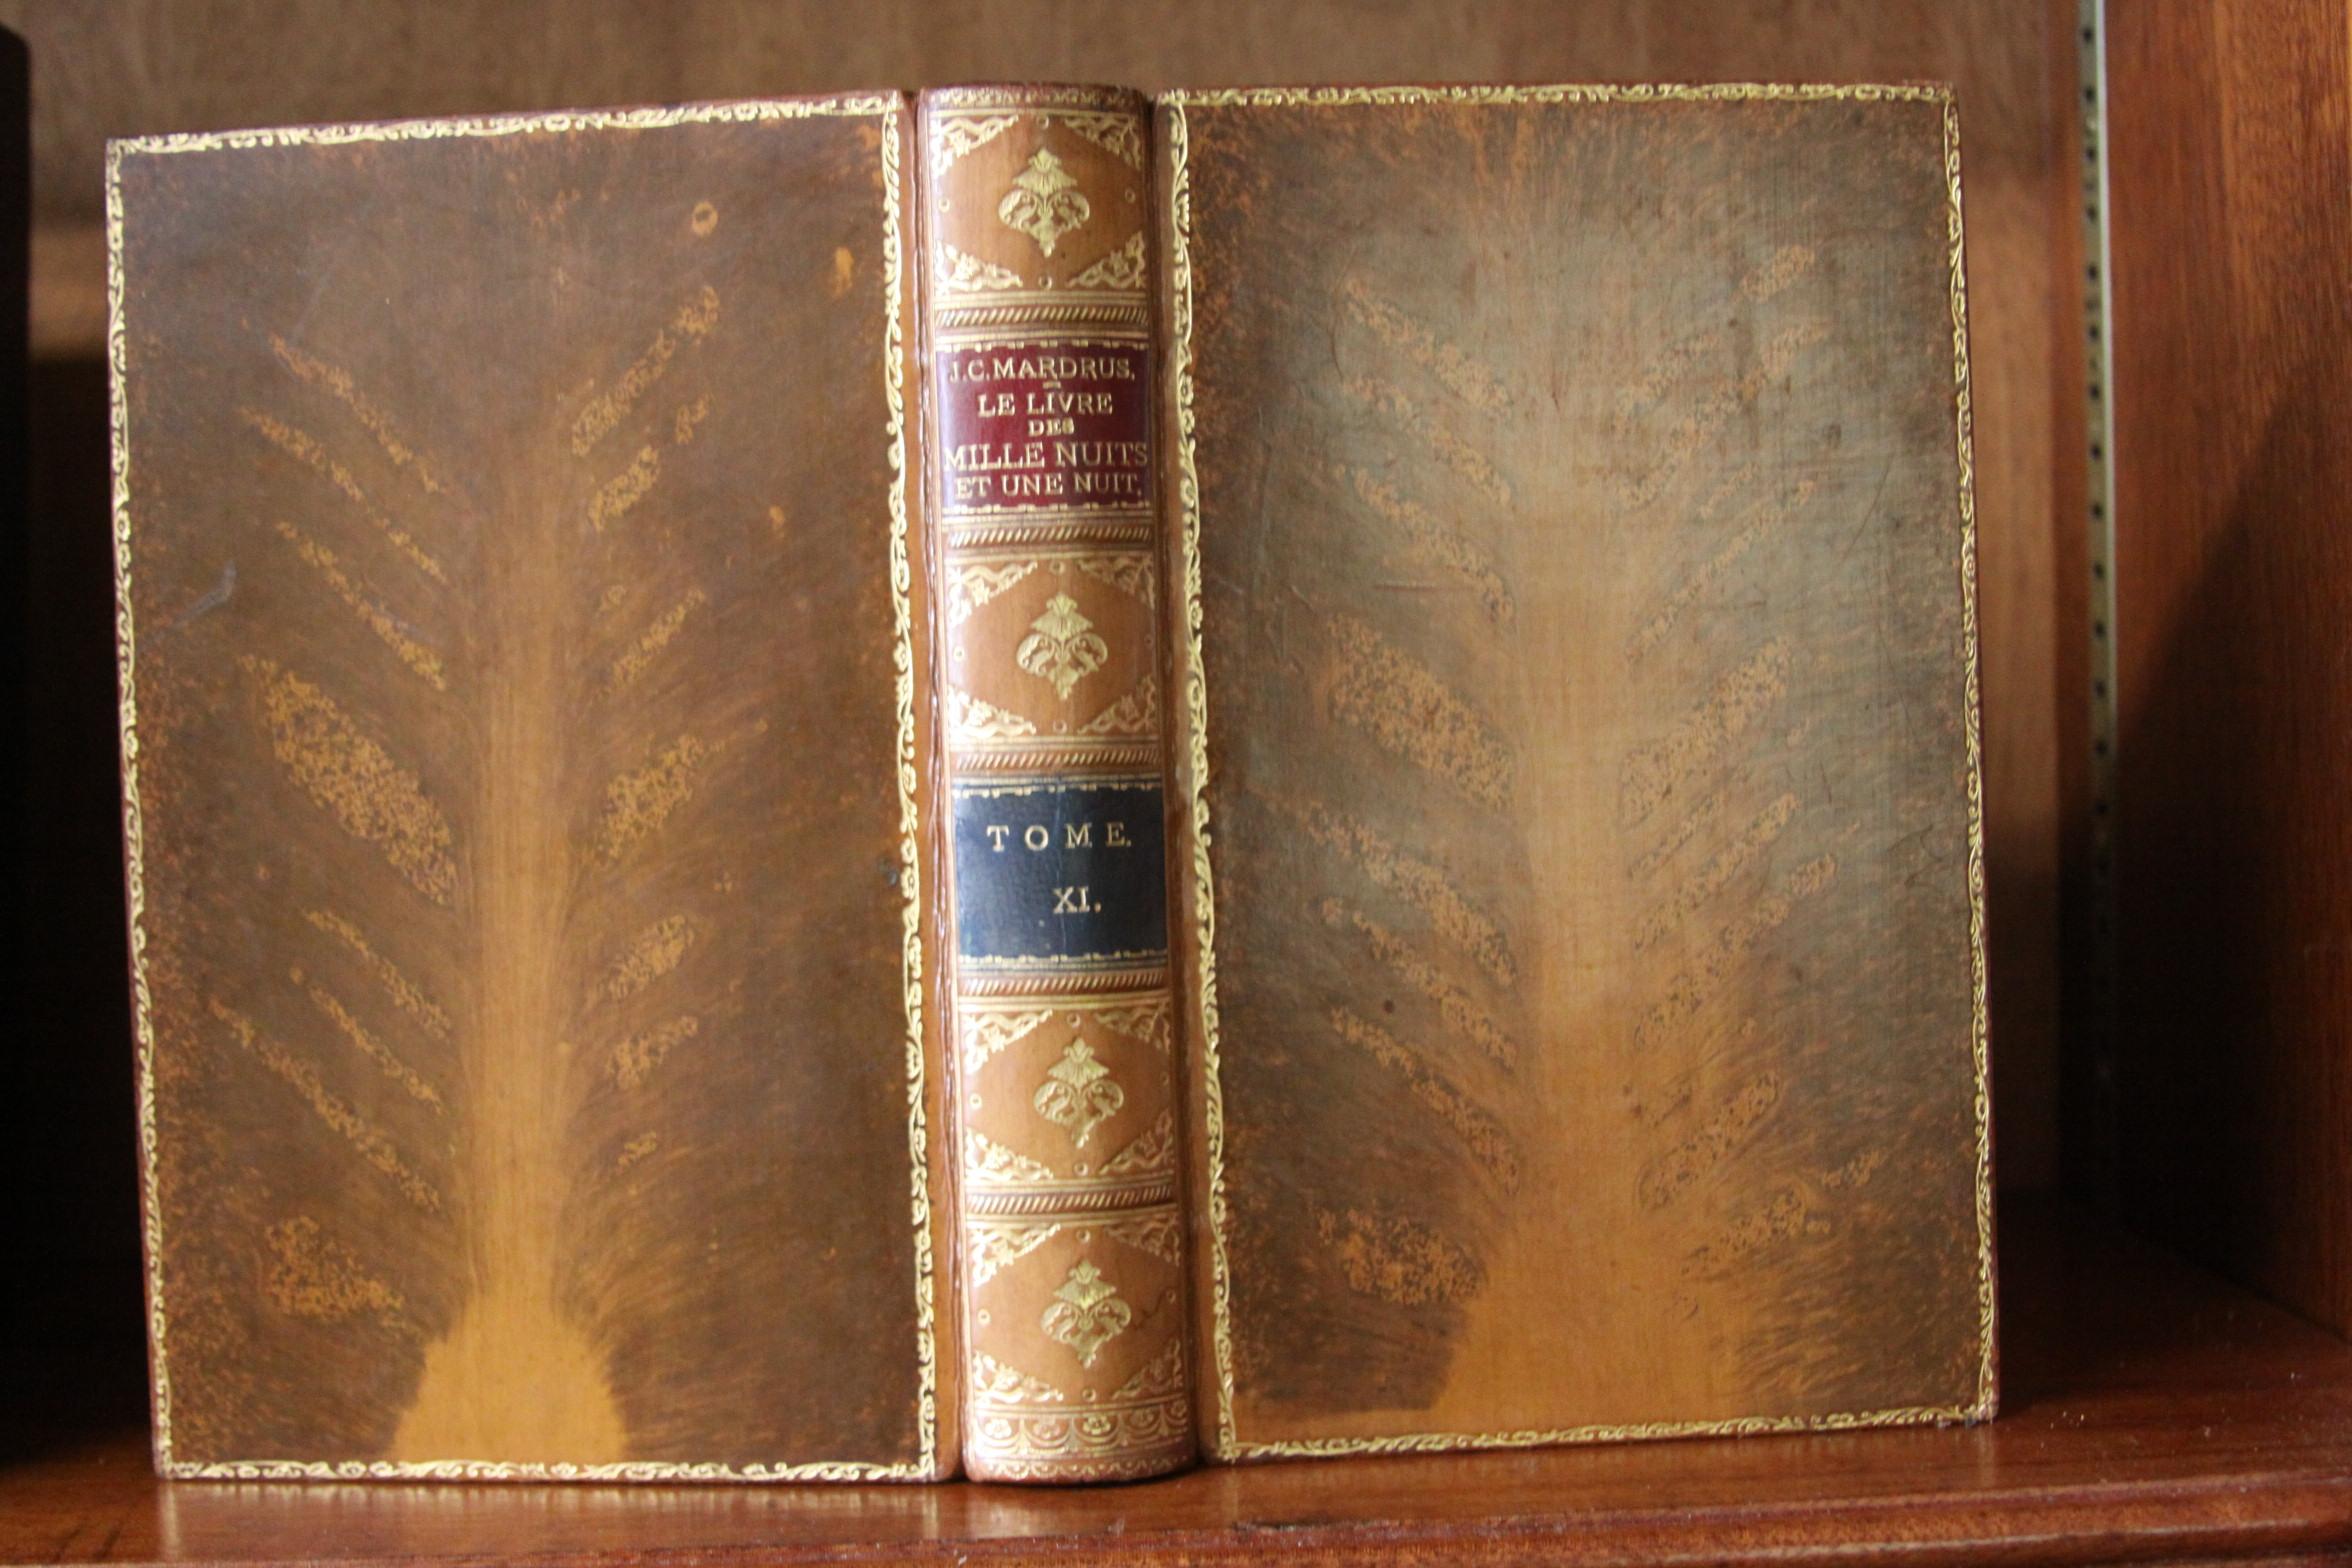 Antique books. Sixteen volumes. Arabian Nights ( French Text) Le Livre Des Millie Nuits Et Une Nuits. Published: Paris Charpentier Et, Eugene Fasquelle Edituer 1903. Bound in full tan polished three calf binding, gilt decorative spine, maroon and